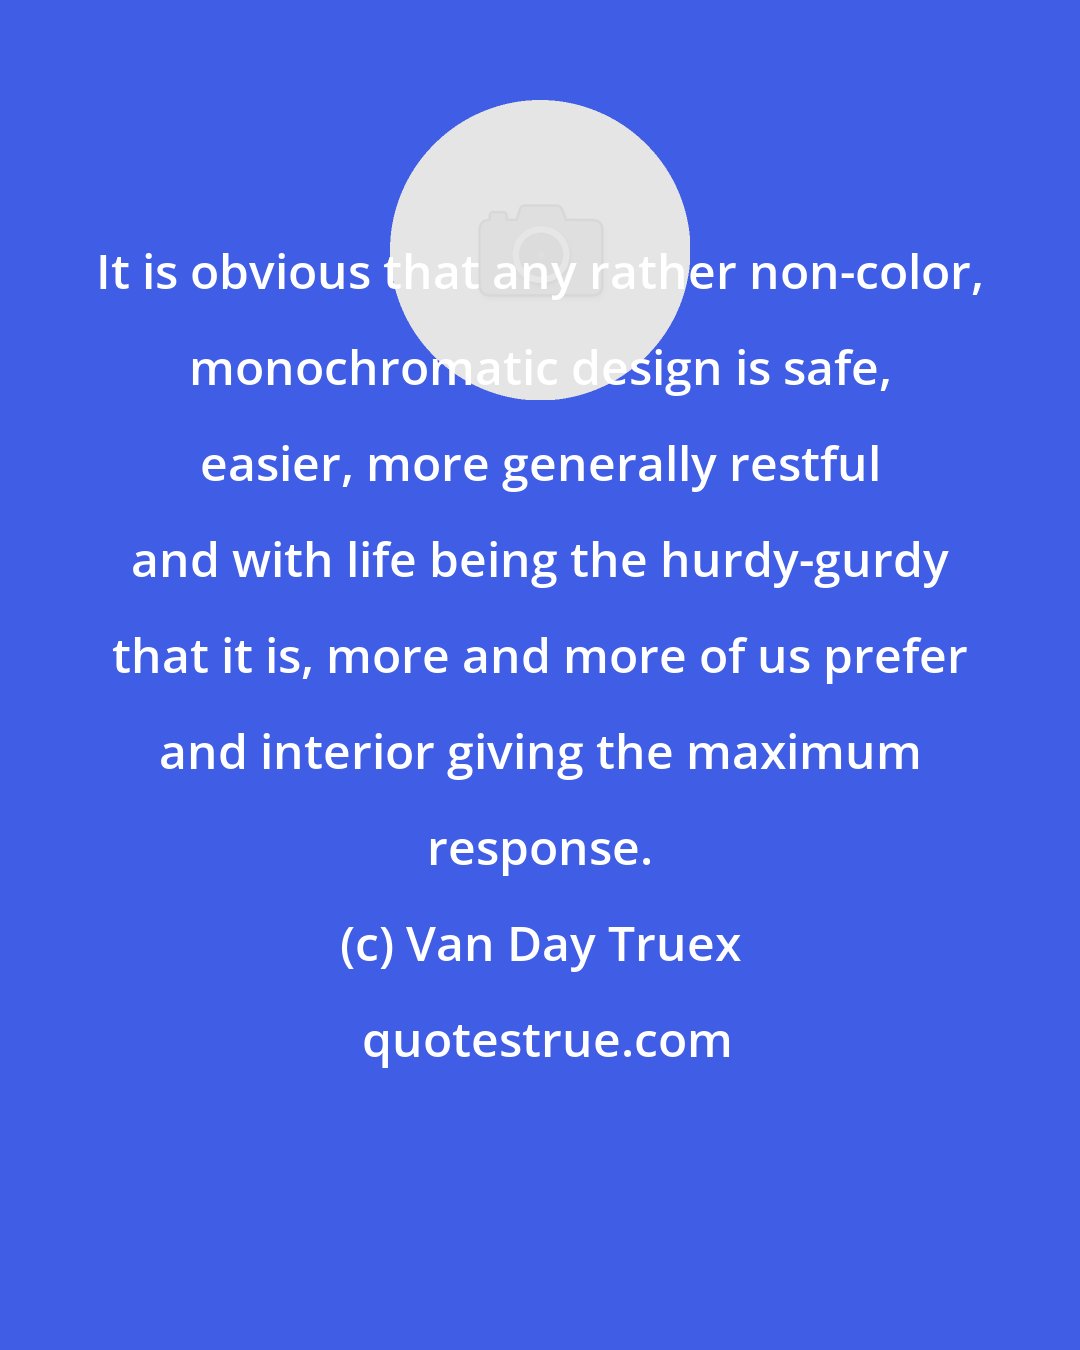 Van Day Truex: It is obvious that any rather non-color, monochromatic design is safe, easier, more generally restful and with life being the hurdy-gurdy that it is, more and more of us prefer and interior giving the maximum response.